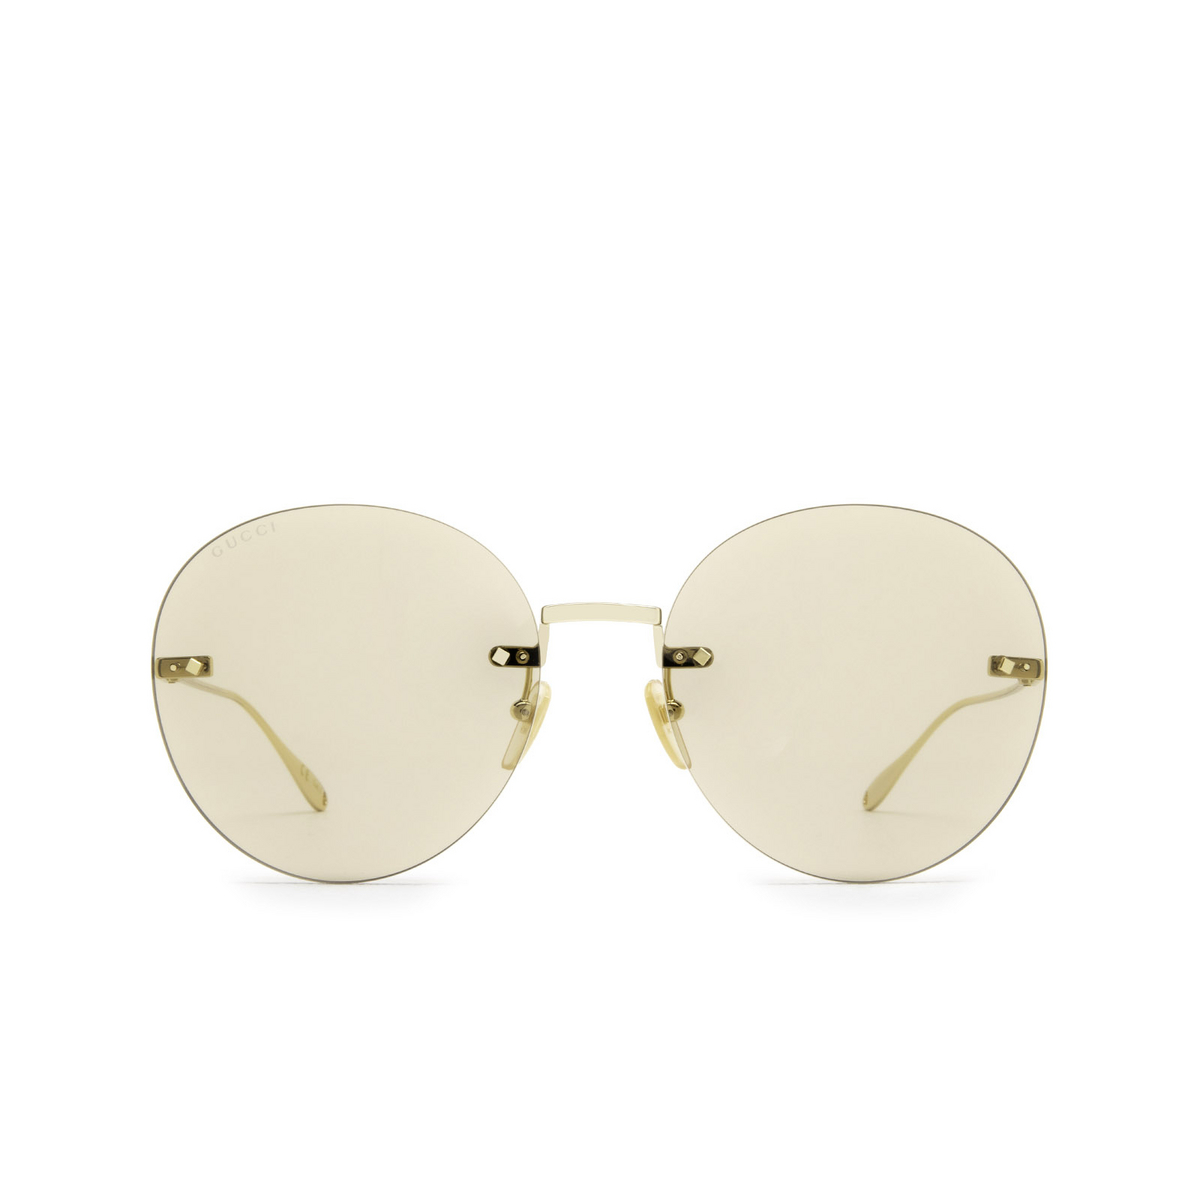 Gucci® Round Sunglasses: GG1149S color Gold 004 - front view.